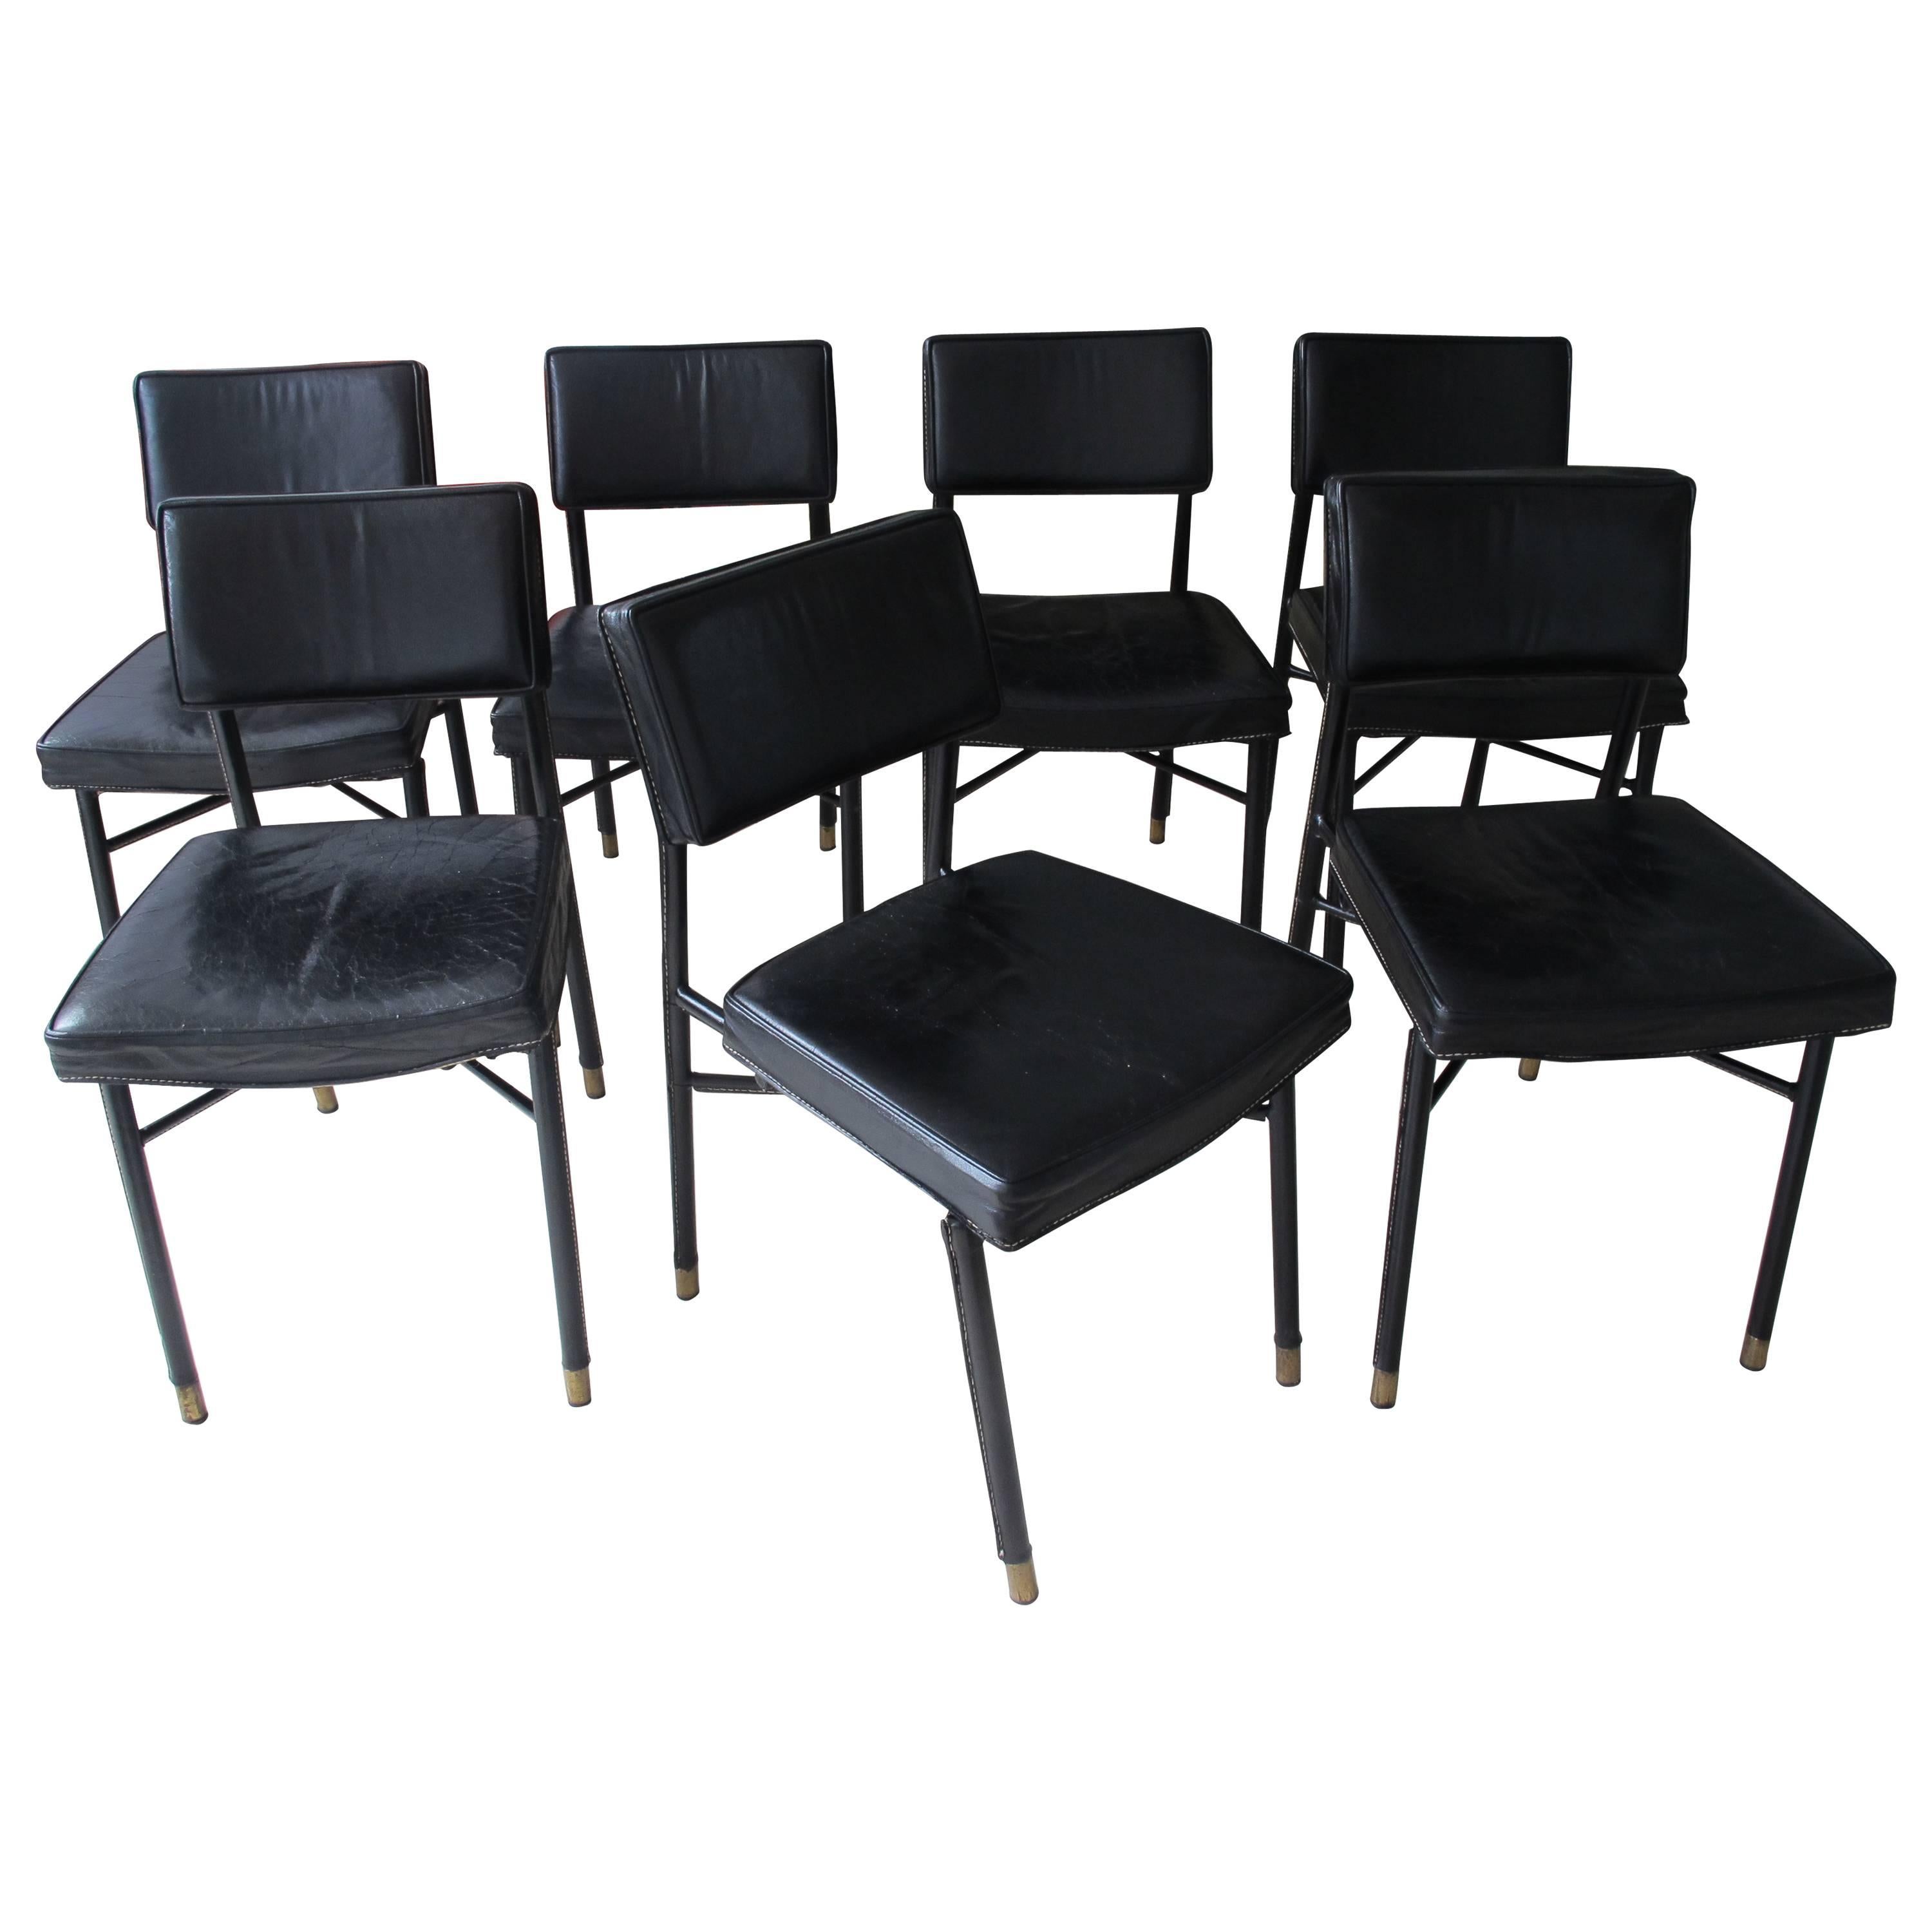 Set of Seven Stitched Leather Dining Chairs by Jacques Adnet 